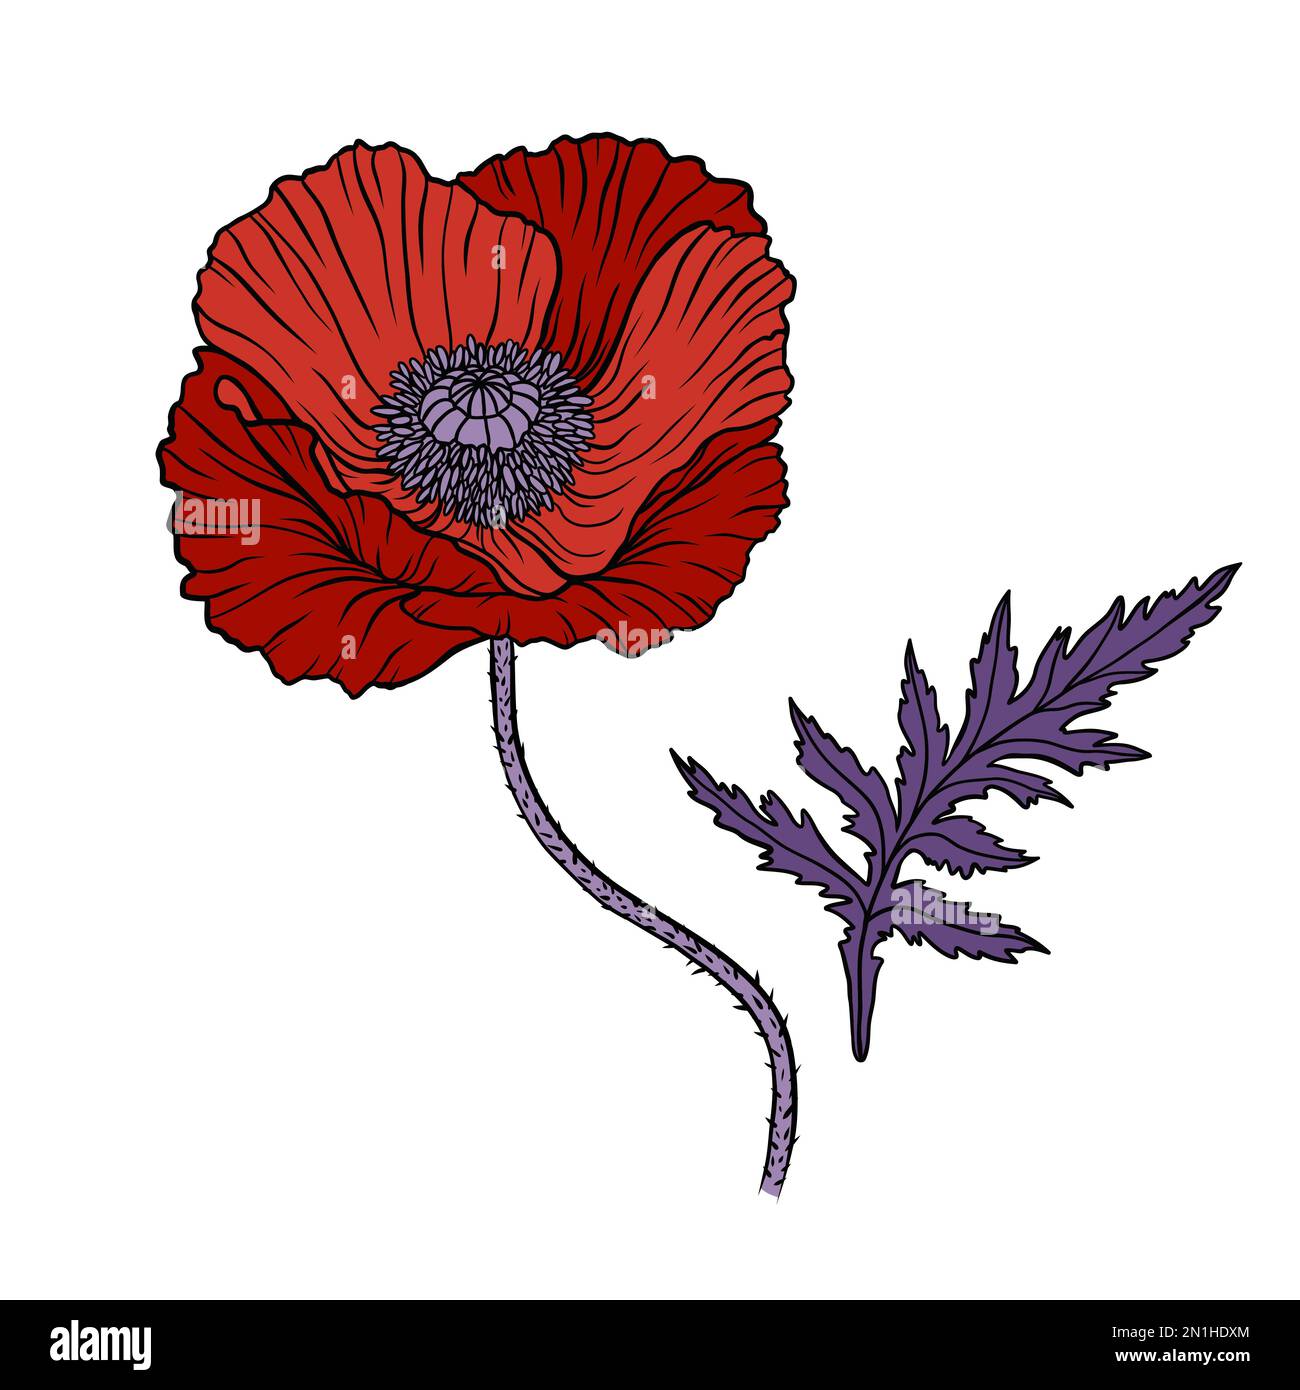 Blooming bright red poppy flowers with stem Vector Image